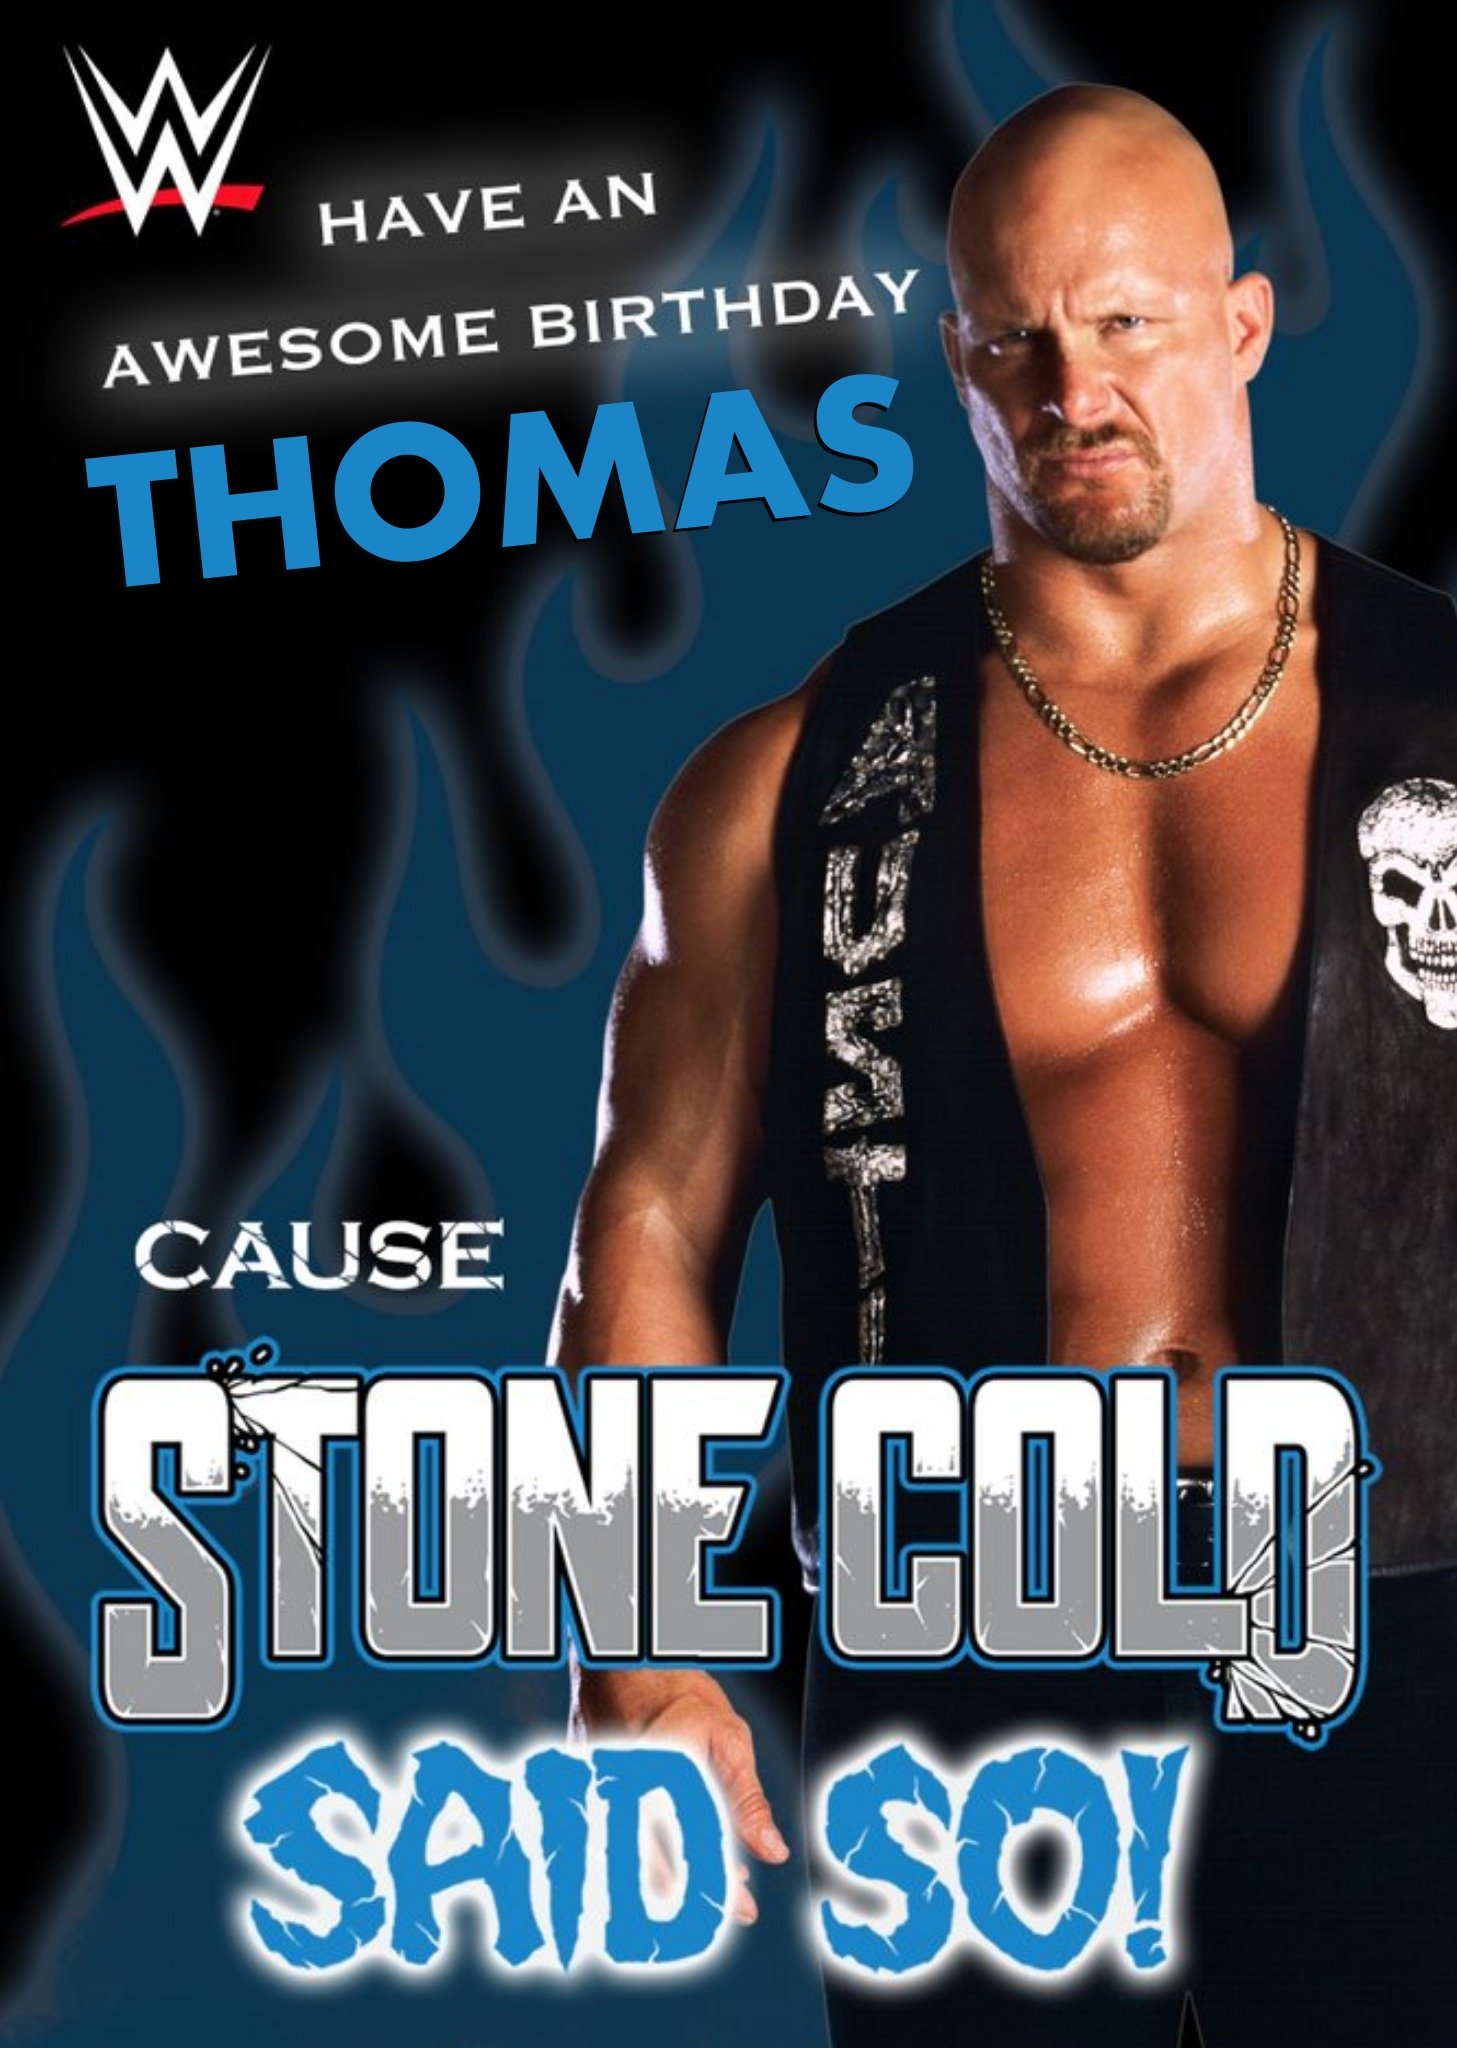 Wwe Have An Awesome Birthday Cause Stone Cold Said So Card, Large